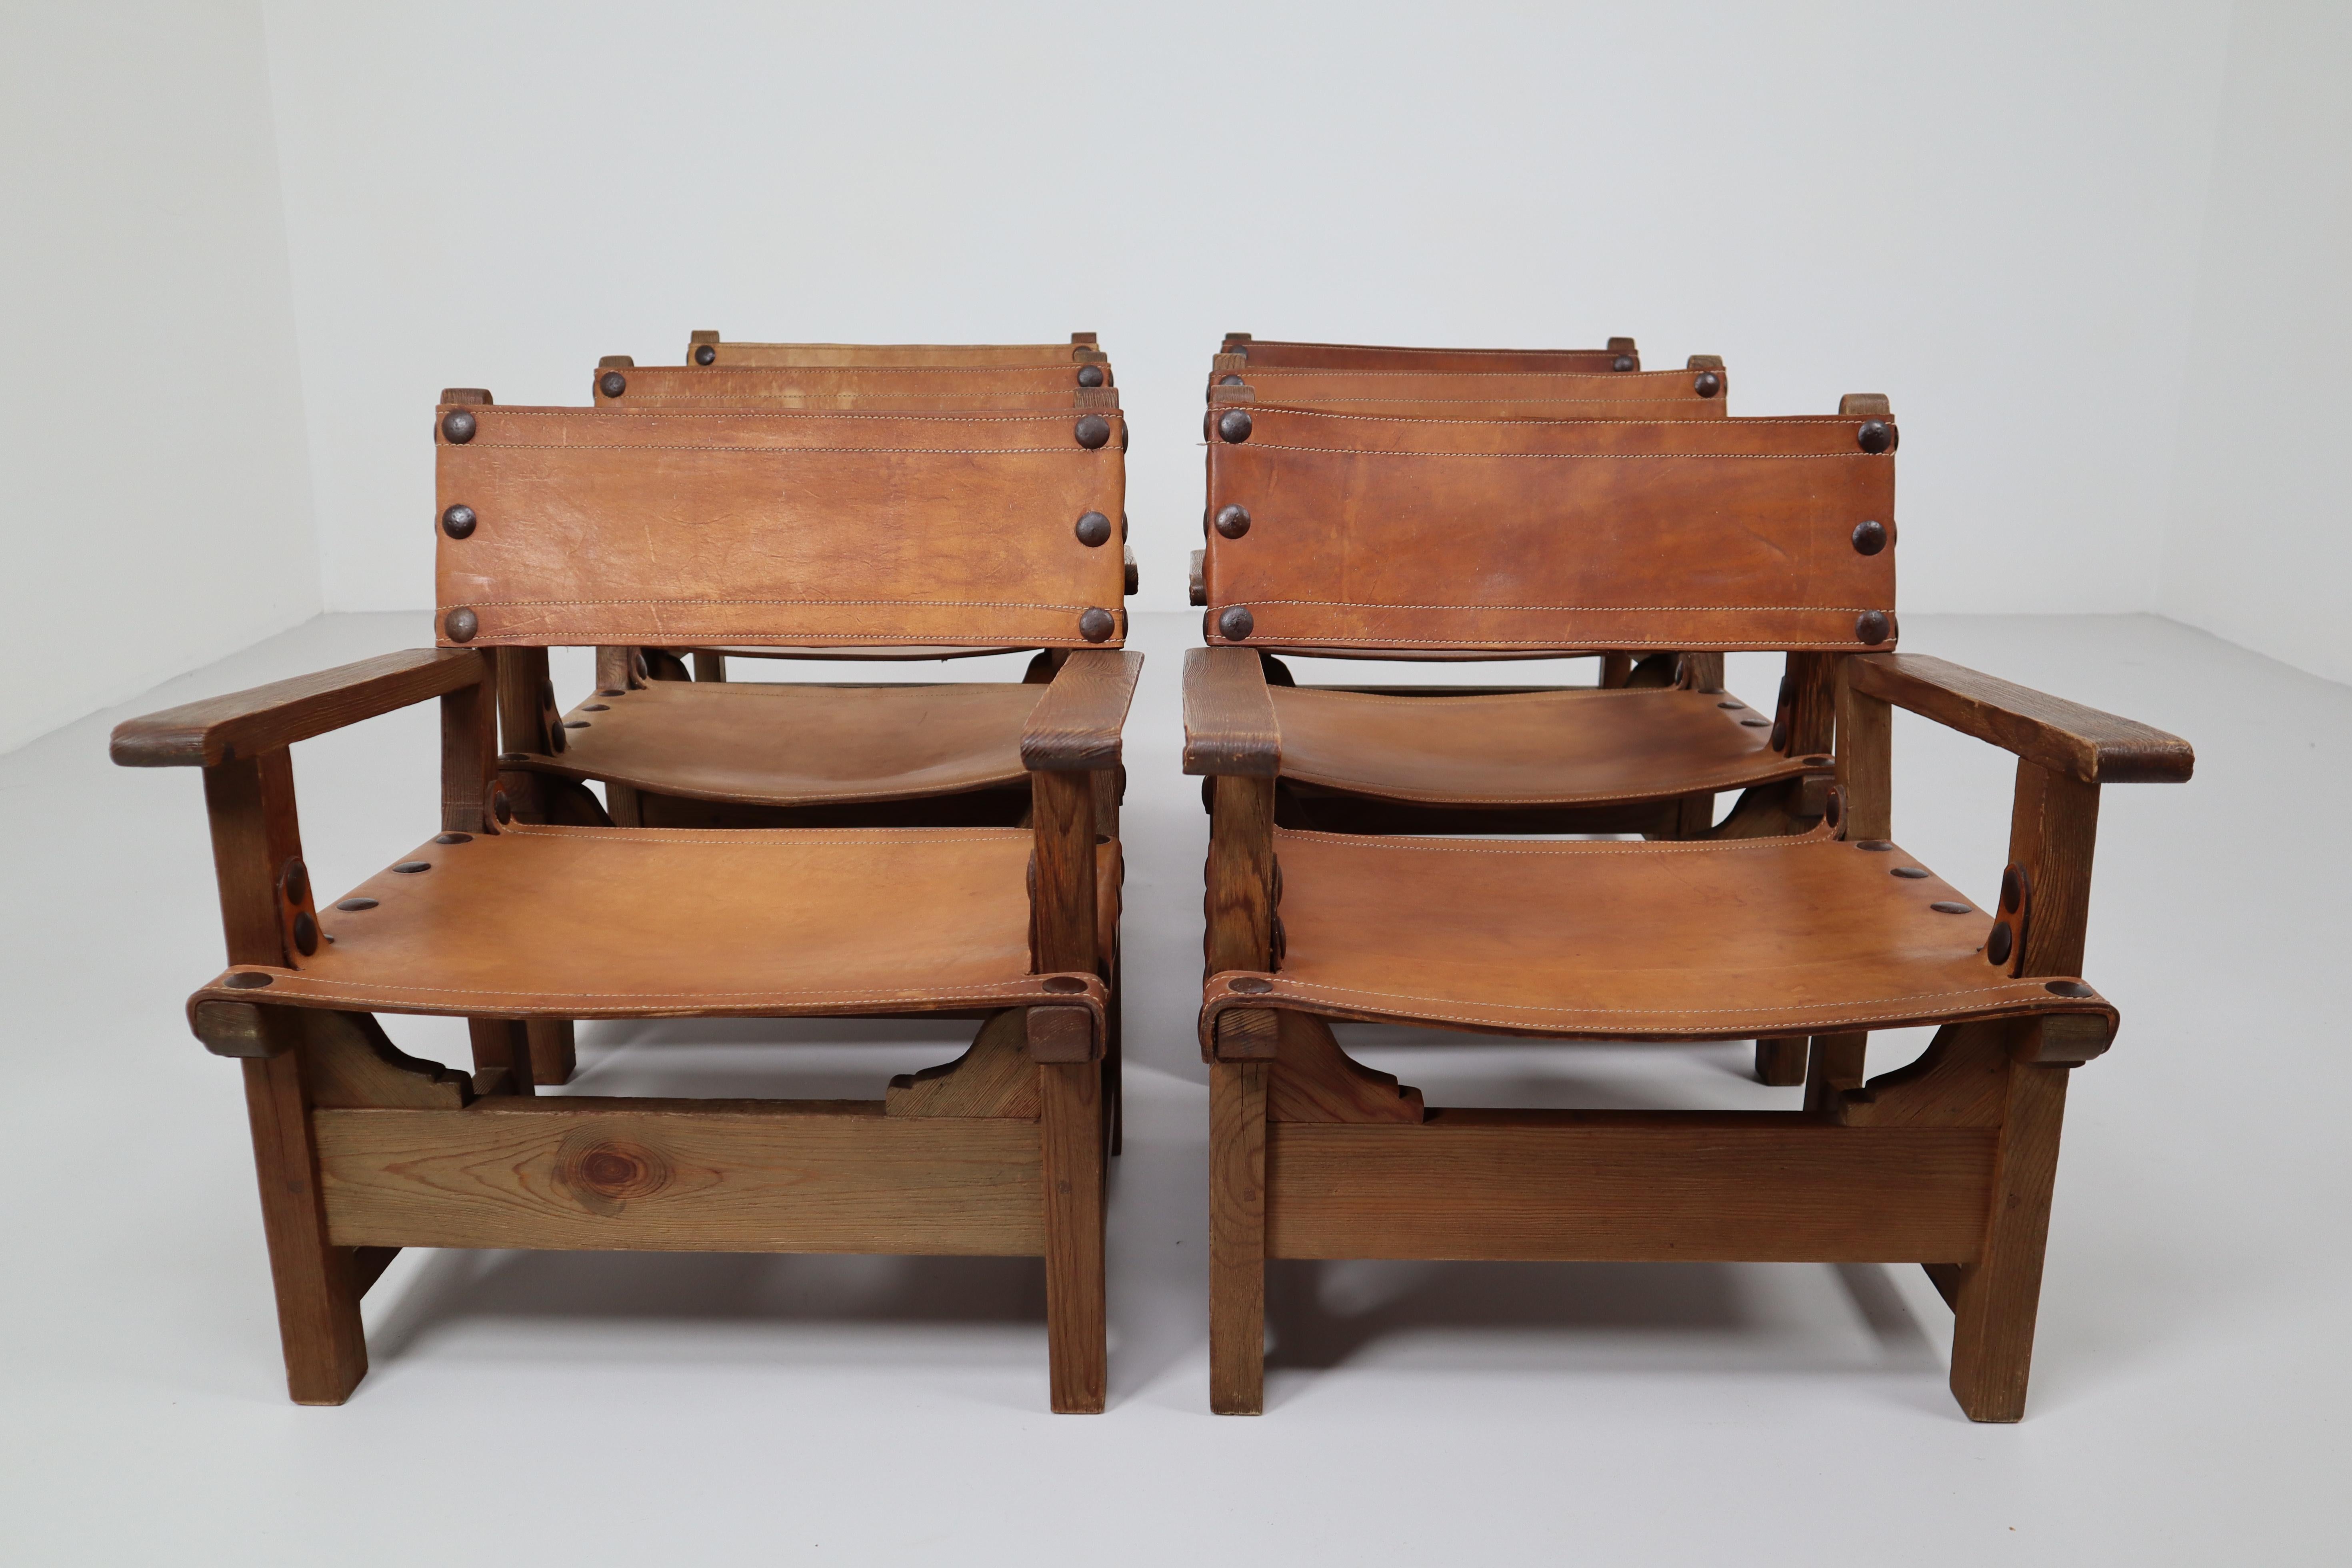 Six Midcentury French Lounge Chairs in Patinated Cognac Saddle Leather, 1950s (Französisch)